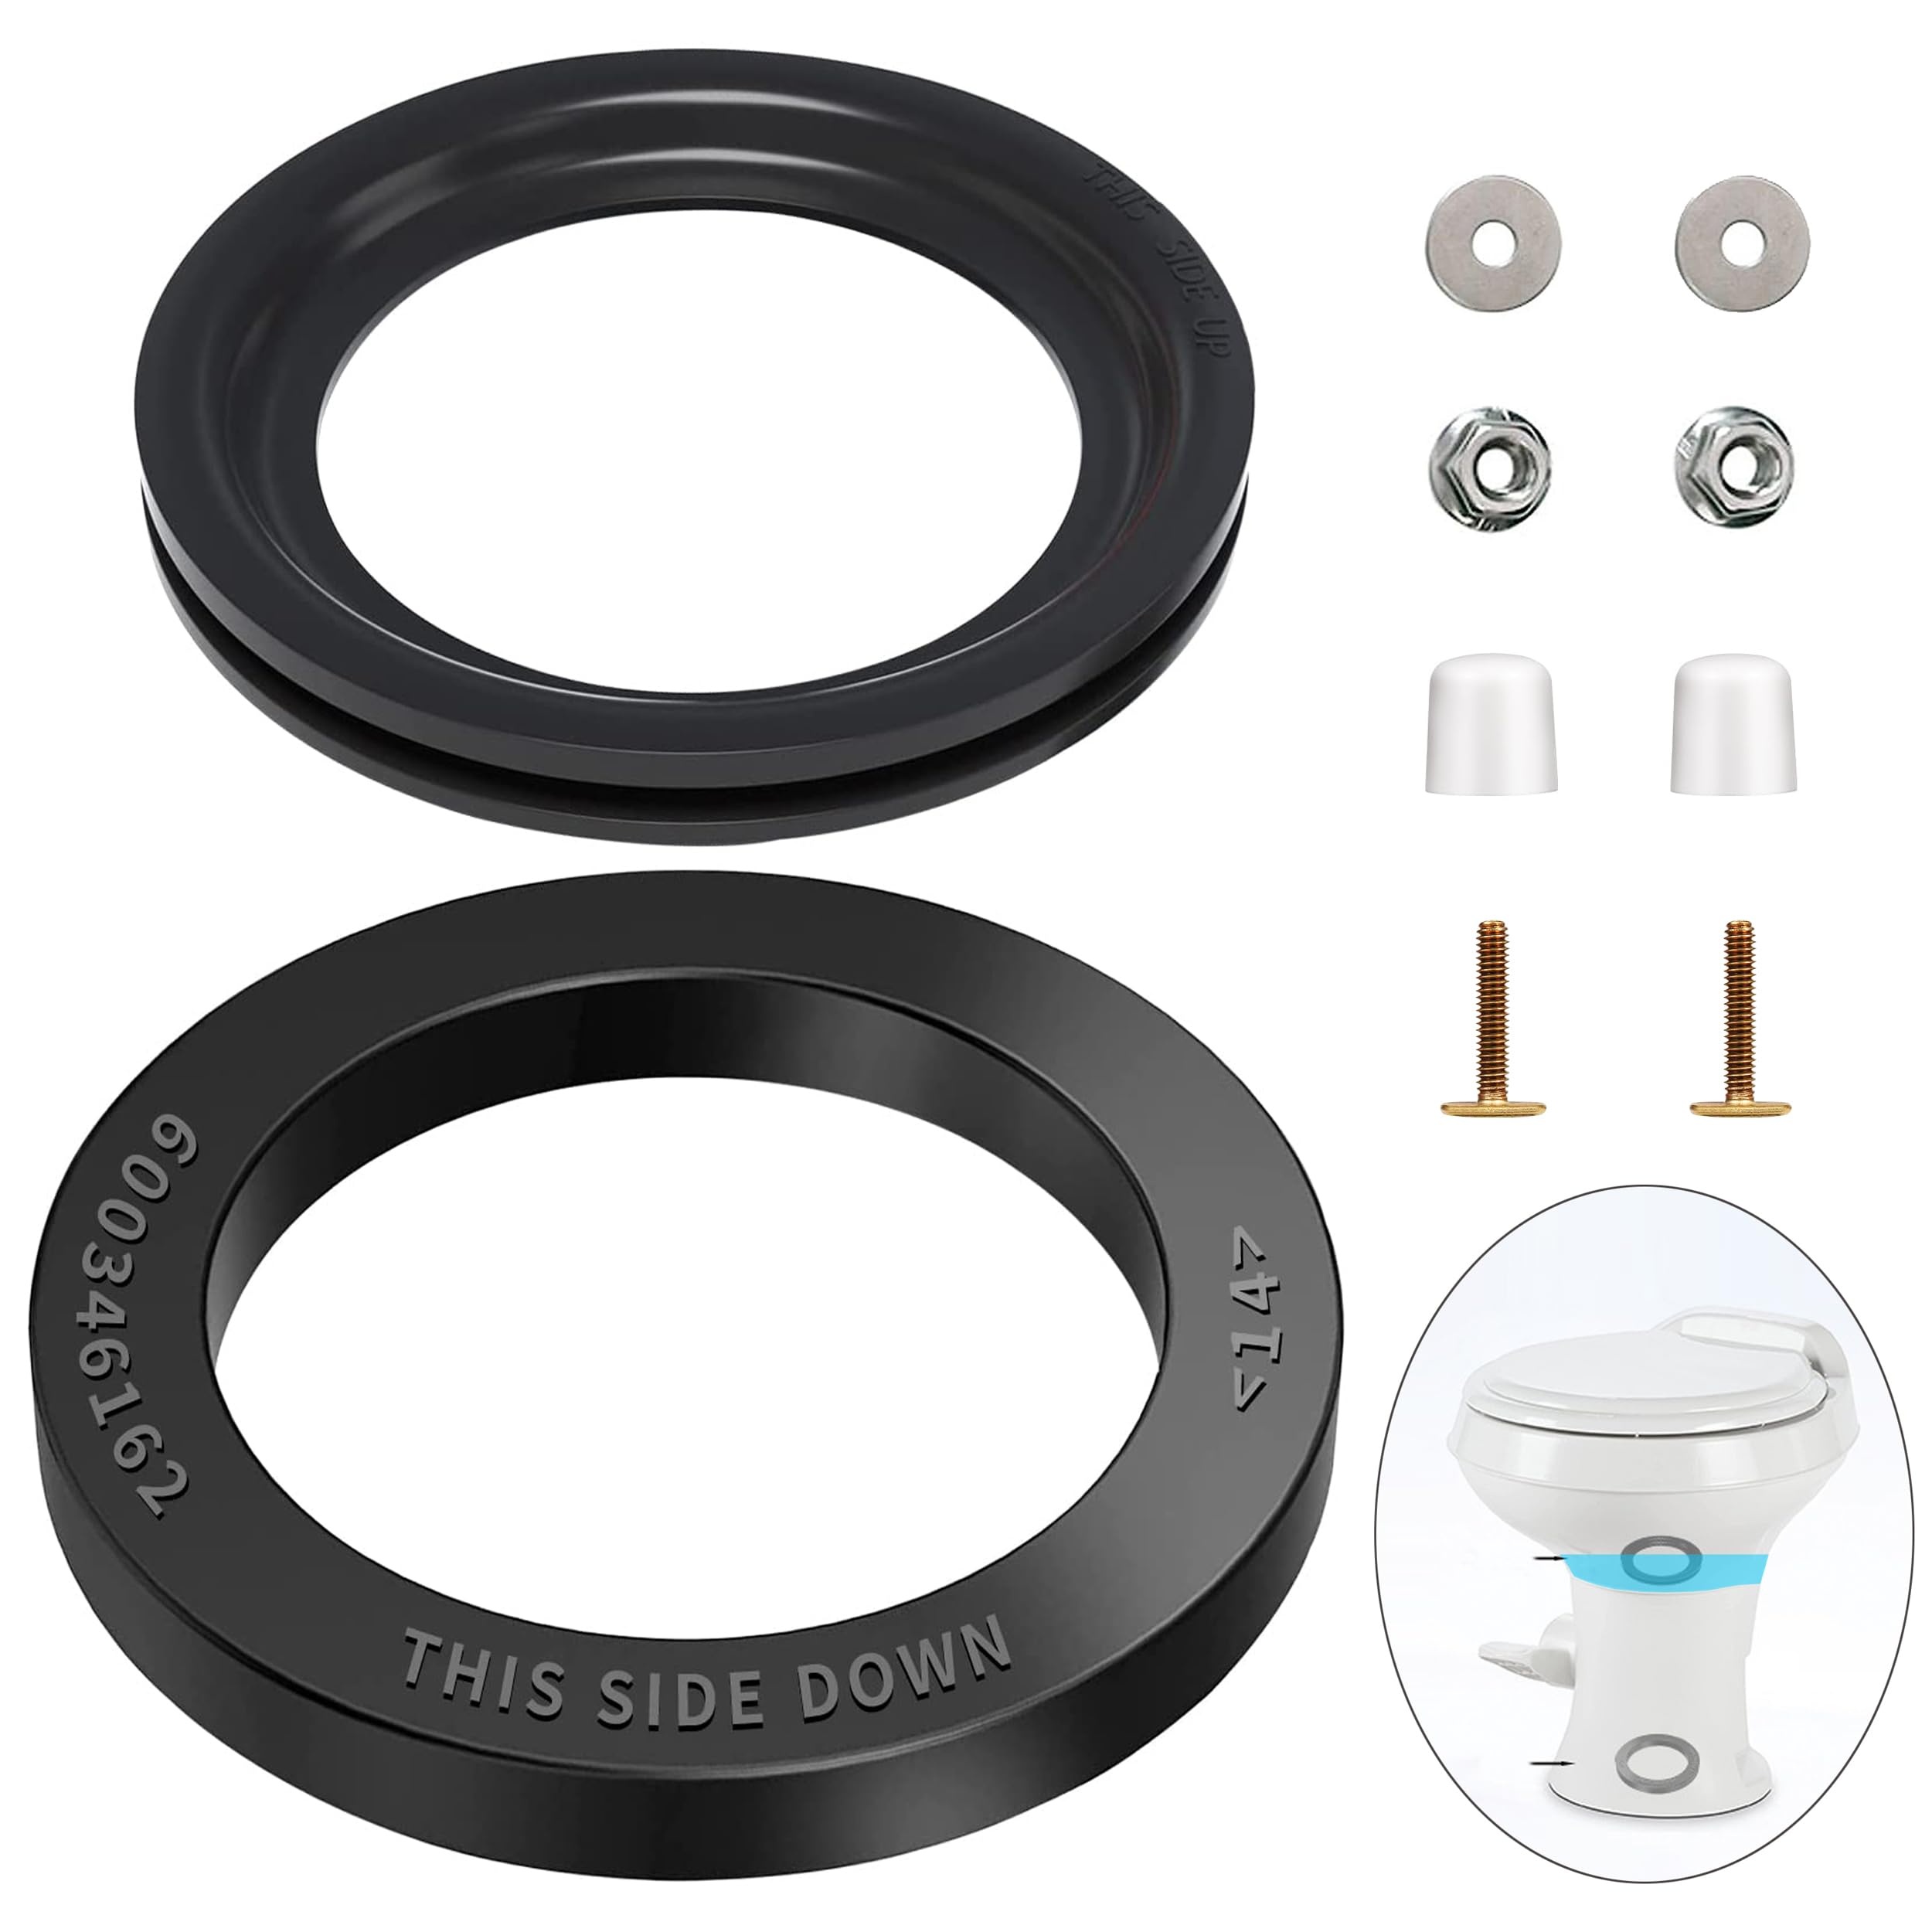  385311658 RV Toilet Flush Ball Seal Kit Replacement, Compatible  Flush Ball Seal for 320/310 / 300 RV Toilets, Ideal Toilet Replacement  Gasket, 2 Pack. : Automotive